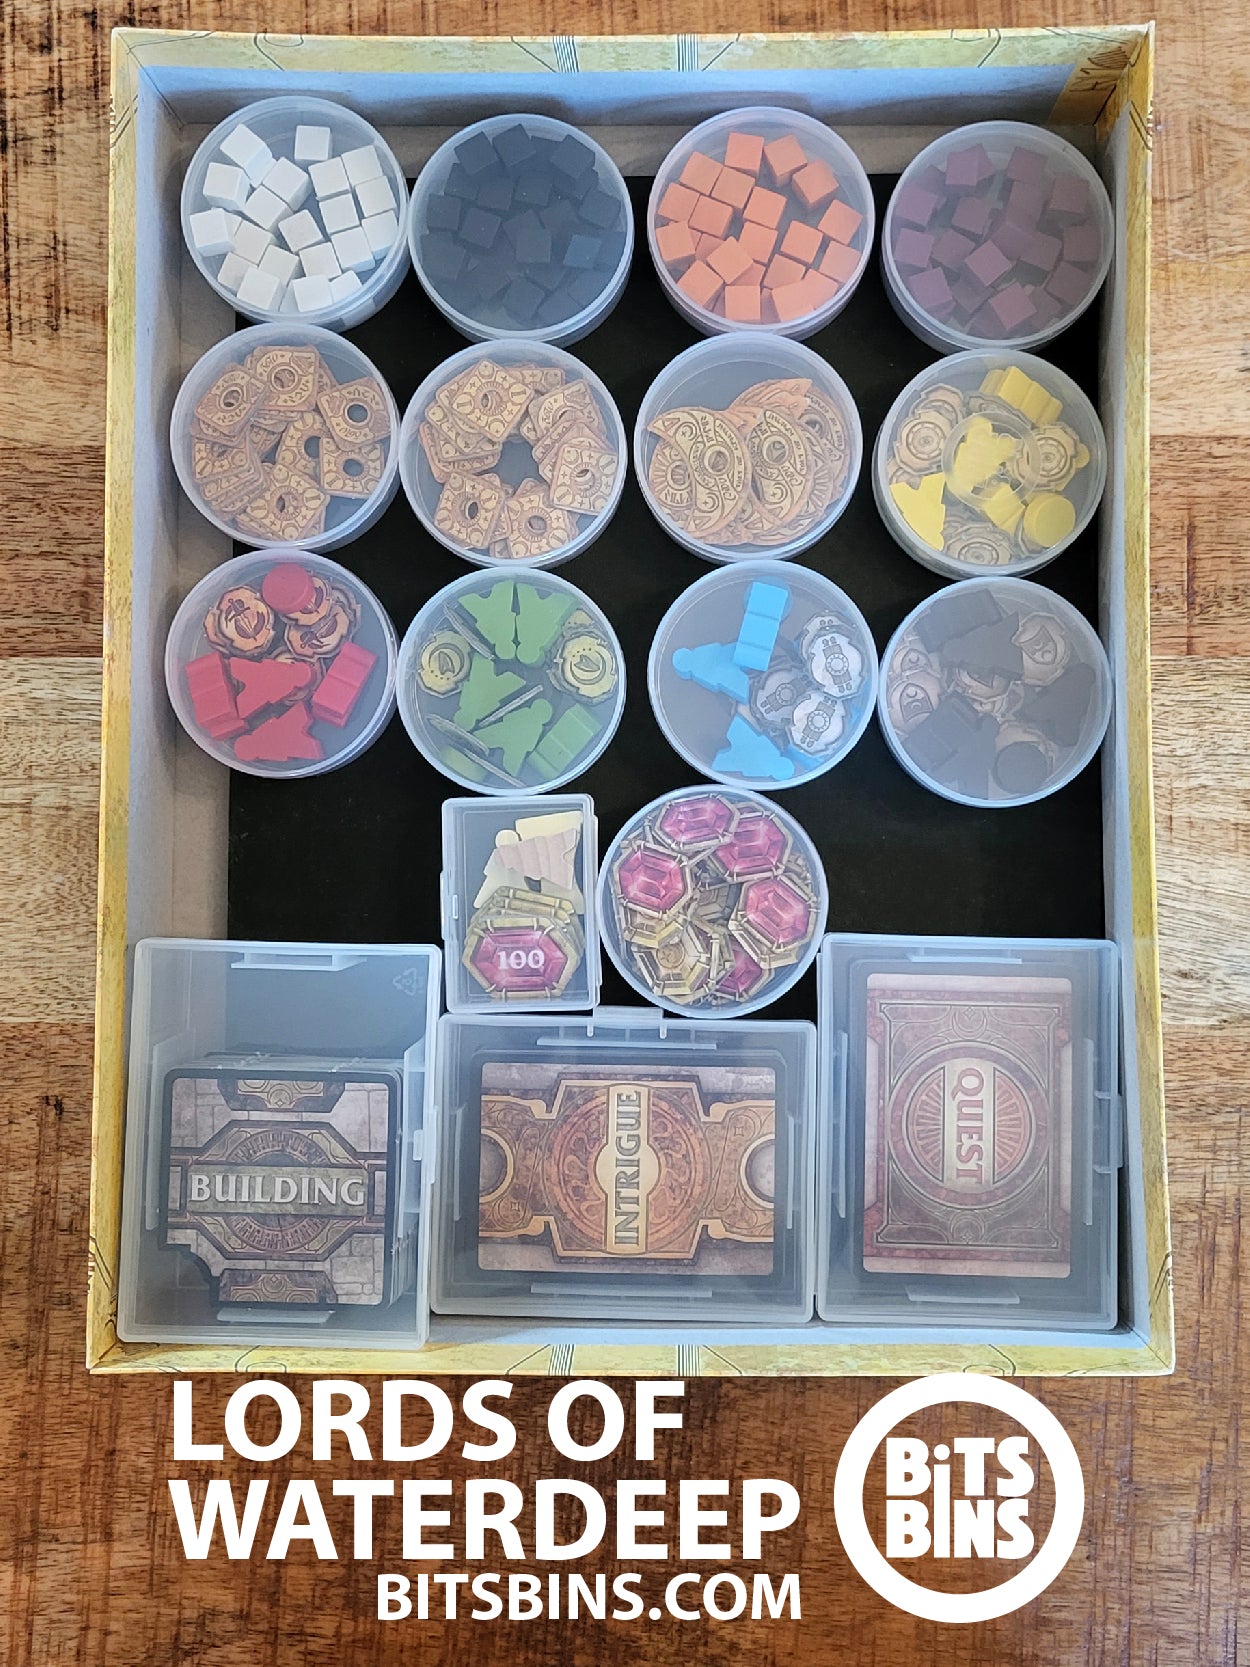 RECOMMENDED LORDS OF WATERDEEP BitsBins - 13 Pods, 1 Mini, 2 Card Box, 1 100+ Card Box